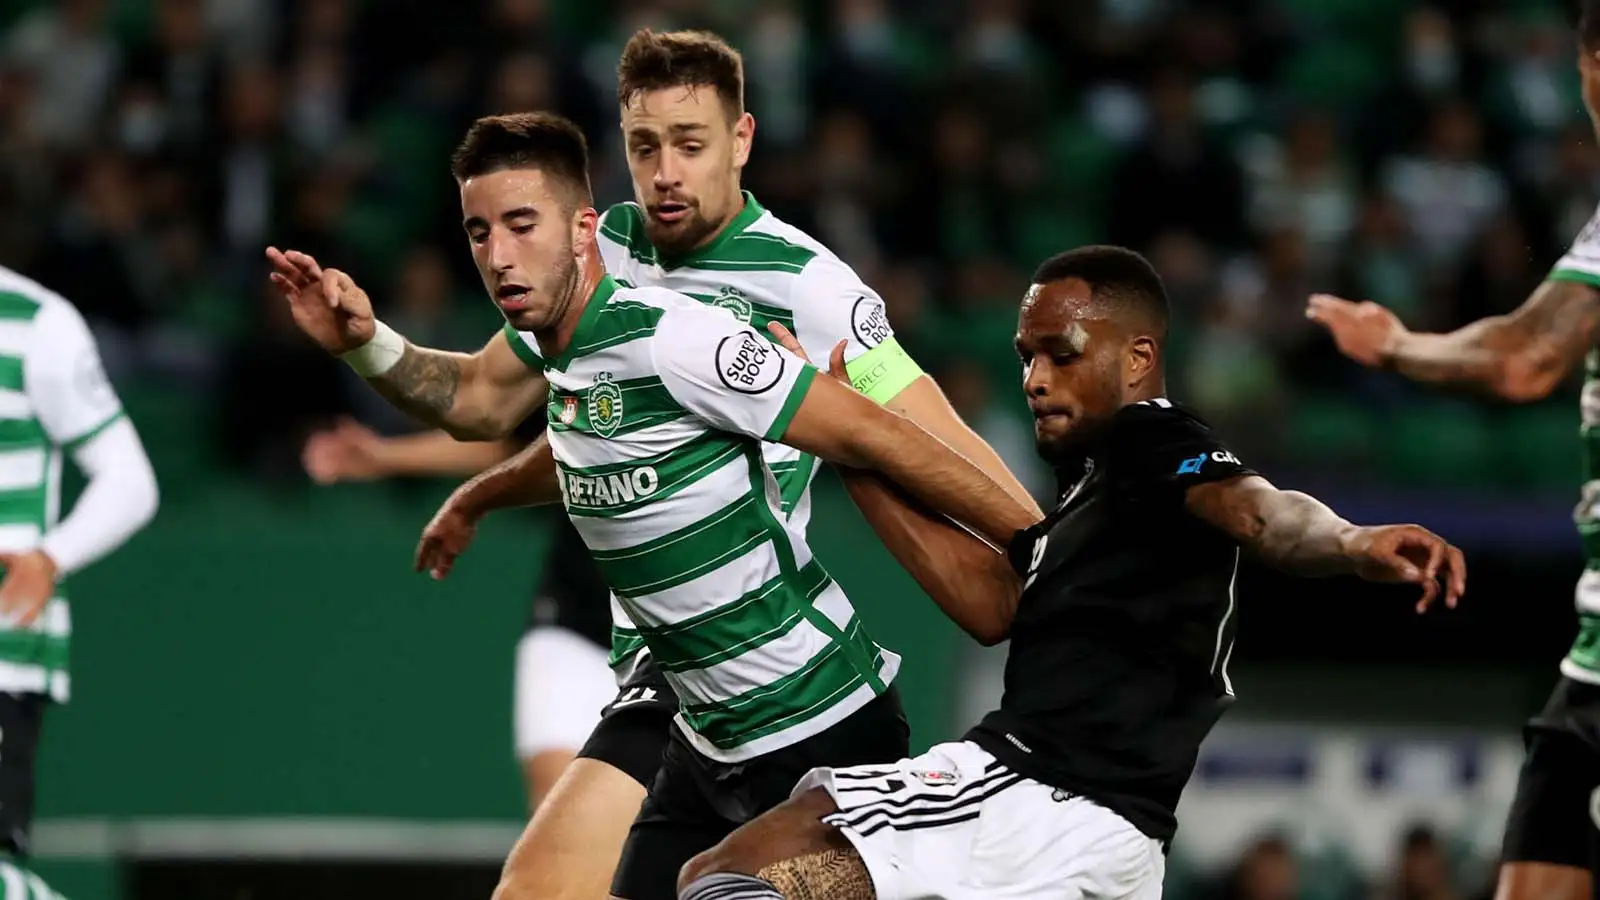 Goncalo Inacio of Sporting during the UEFA Champions League group C match between Sporting CP and Besiktas JK at the Jose Alvalade stadium in Lisbon, Portugal